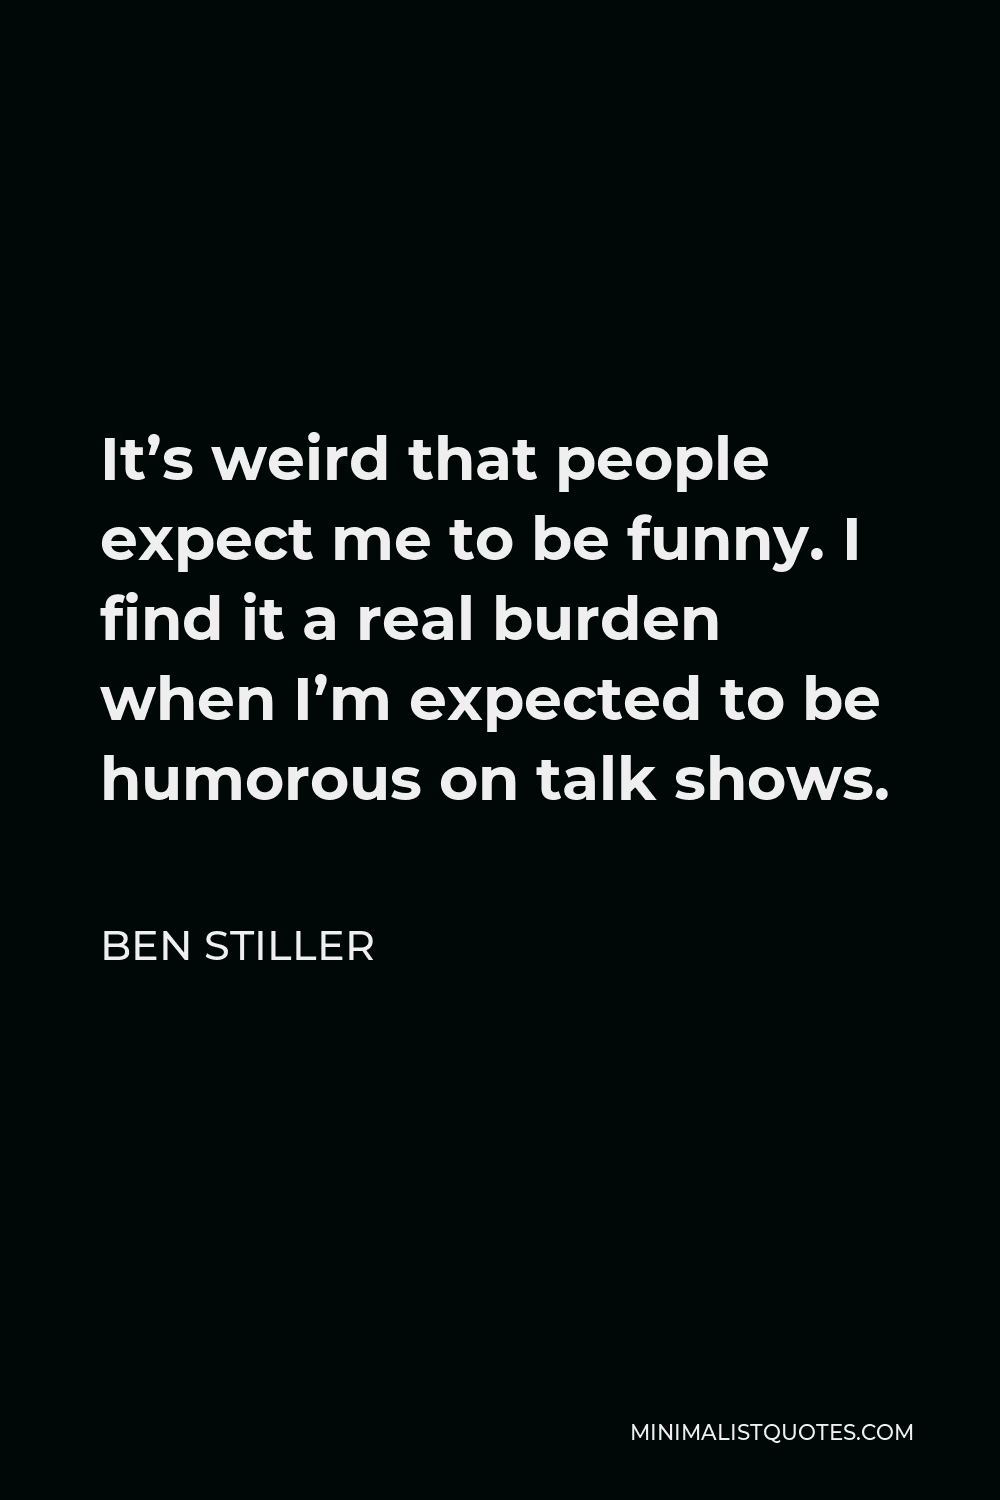 Ben Stiller Quote - It’s weird that people expect me to be funny. I find it a real burden when I’m expected to be humorous on talk shows.